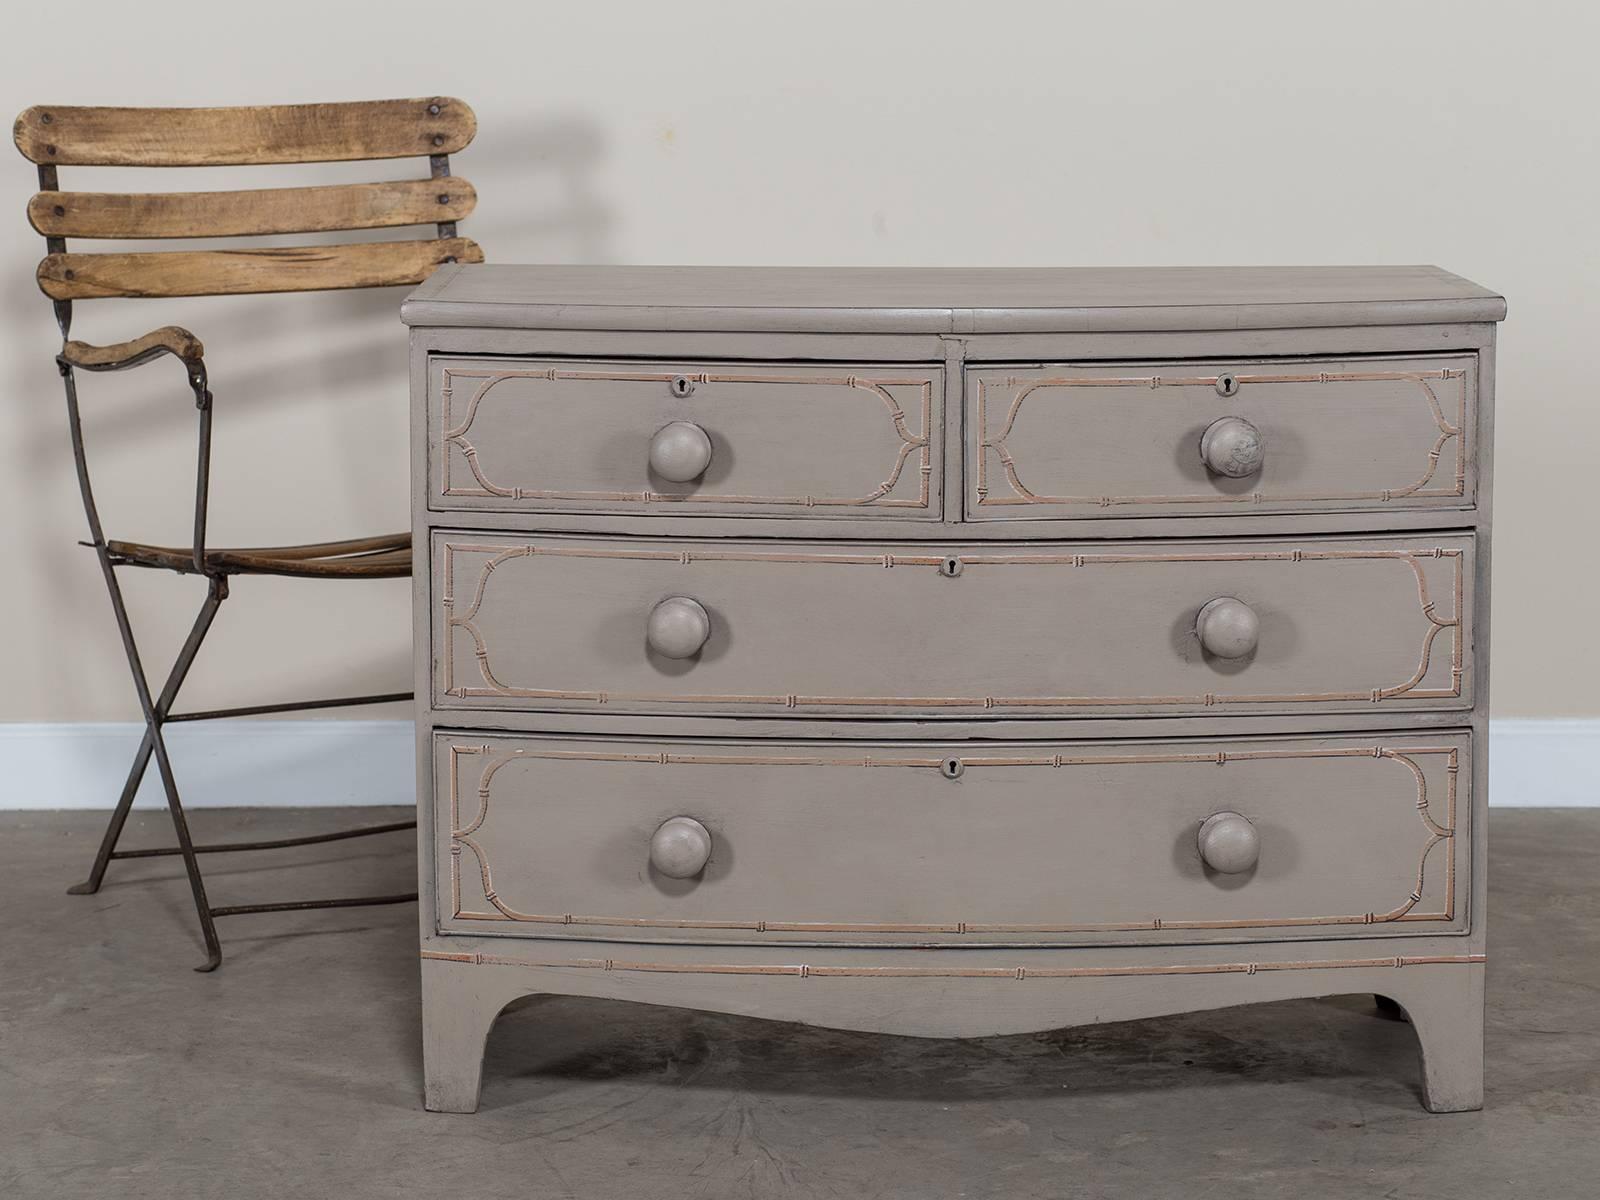 Receive our new selections direct from 1stdibs by email each week. Please click on “Follow Dealer” button below and see them first!

The Classic lines of this antique English bow front chest of drawers give the piece its graceful appearance.